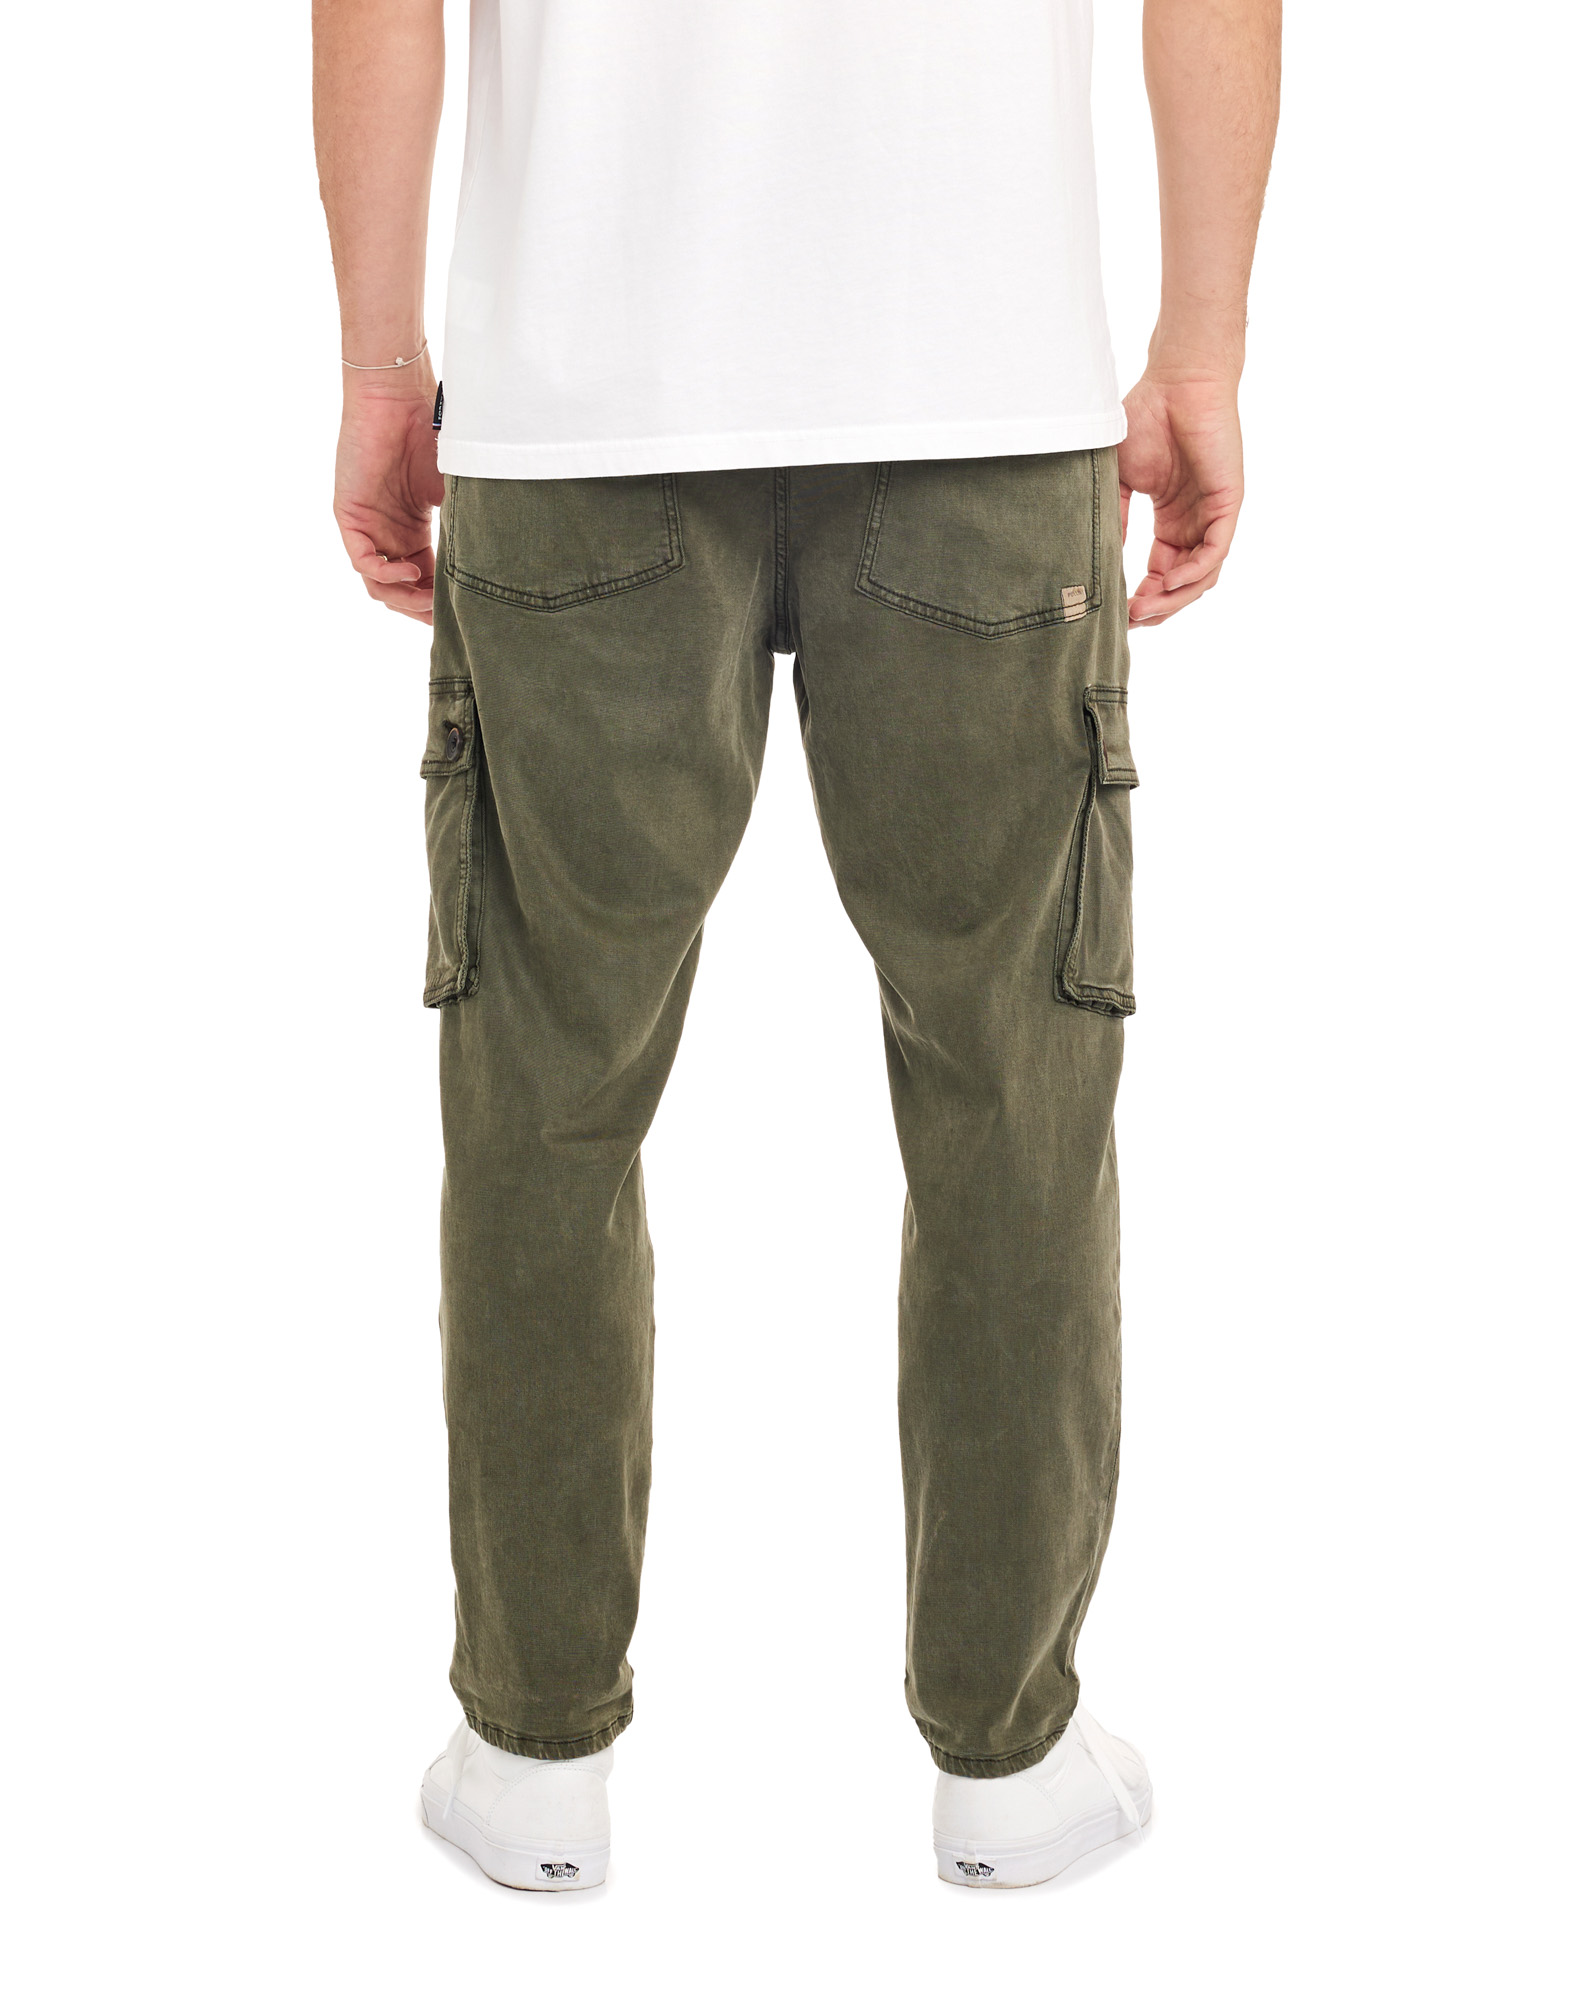 Men's Stretch Golf Pants Slim Fit Quick Dry Pants - Army Green / S